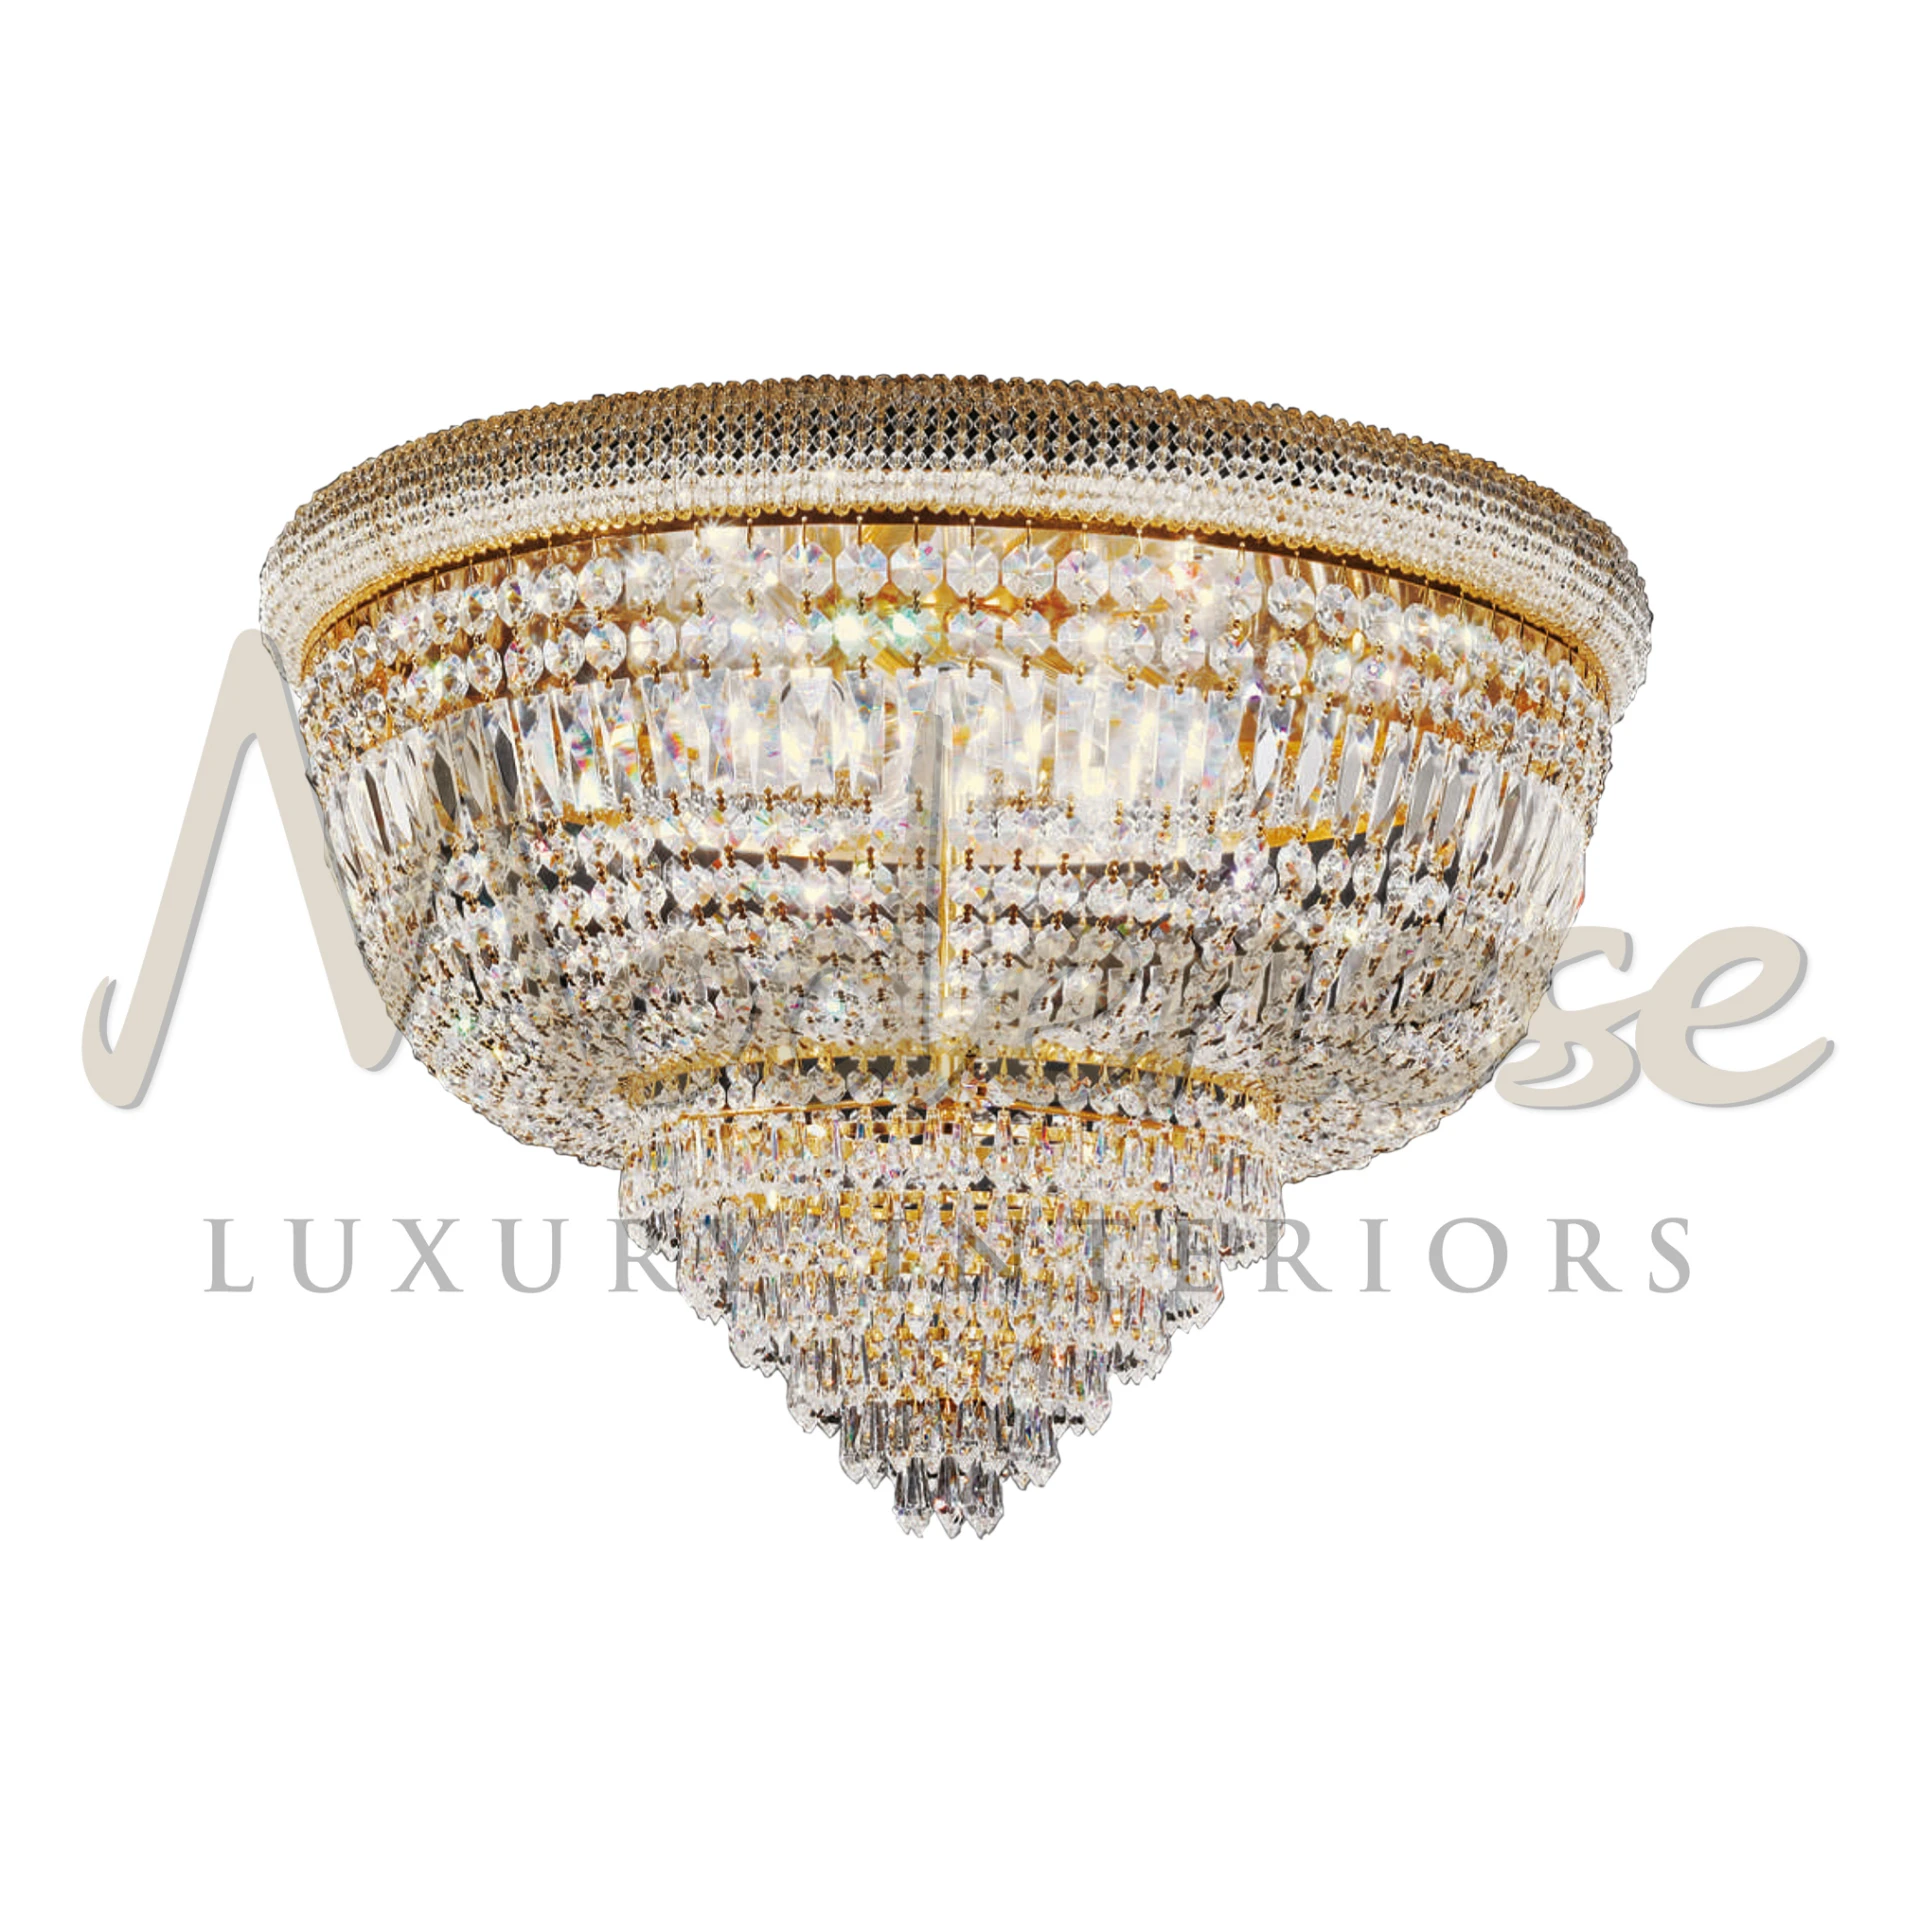 Magnificent Palace Ceiling Lamp with crystal curtain and gold accent.